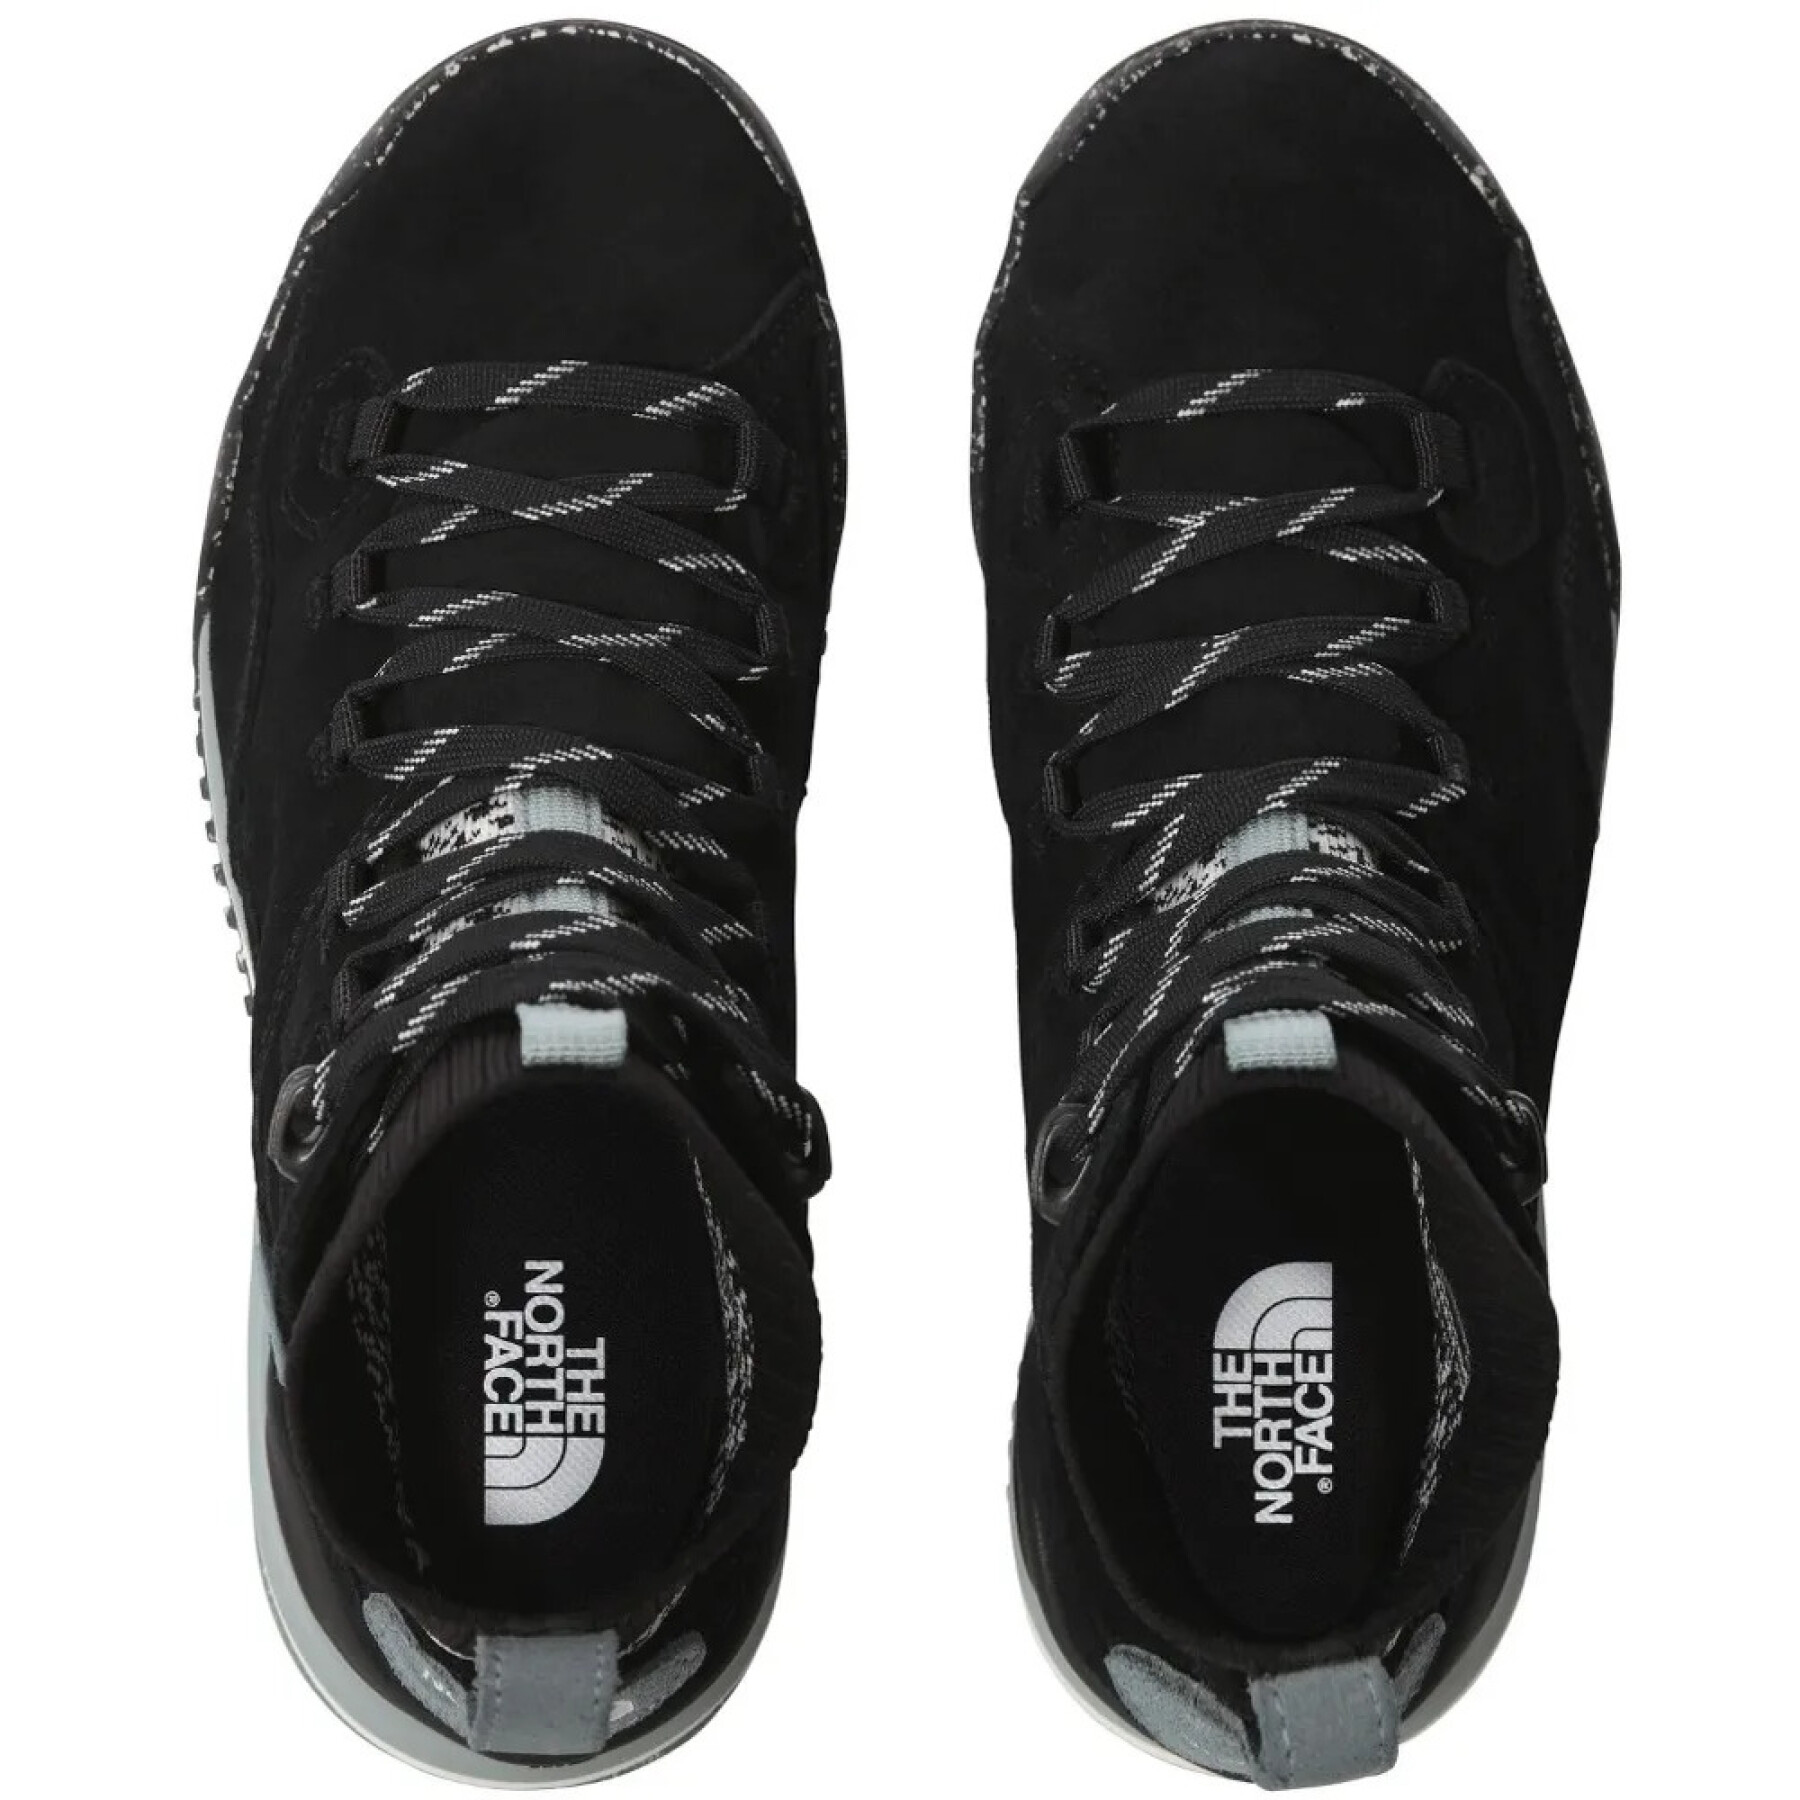 Chaussures montantes femme The North Face Back-to-berkeley